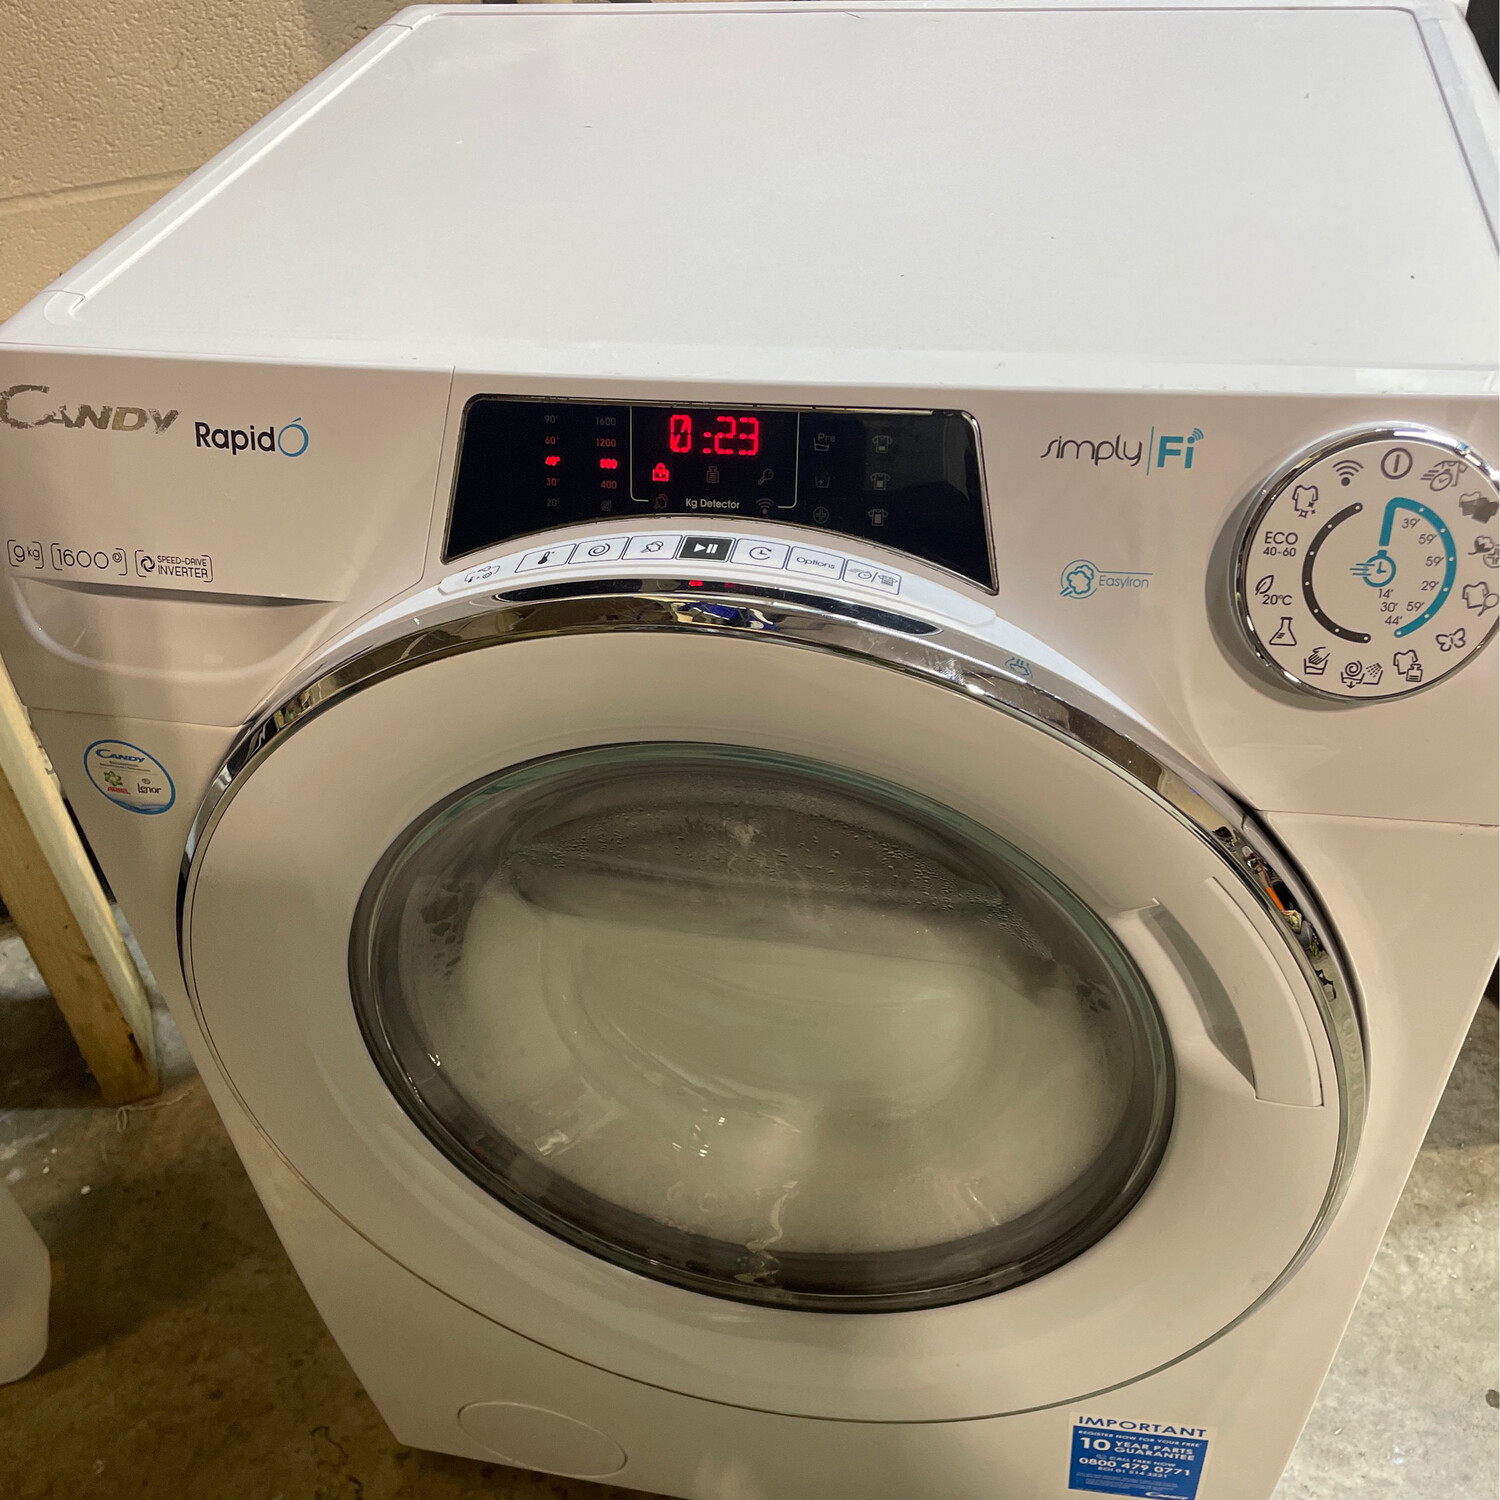 Candy  Rapid O Washer 1600Spin Simply fI Refurbished +6 Months Guarantee